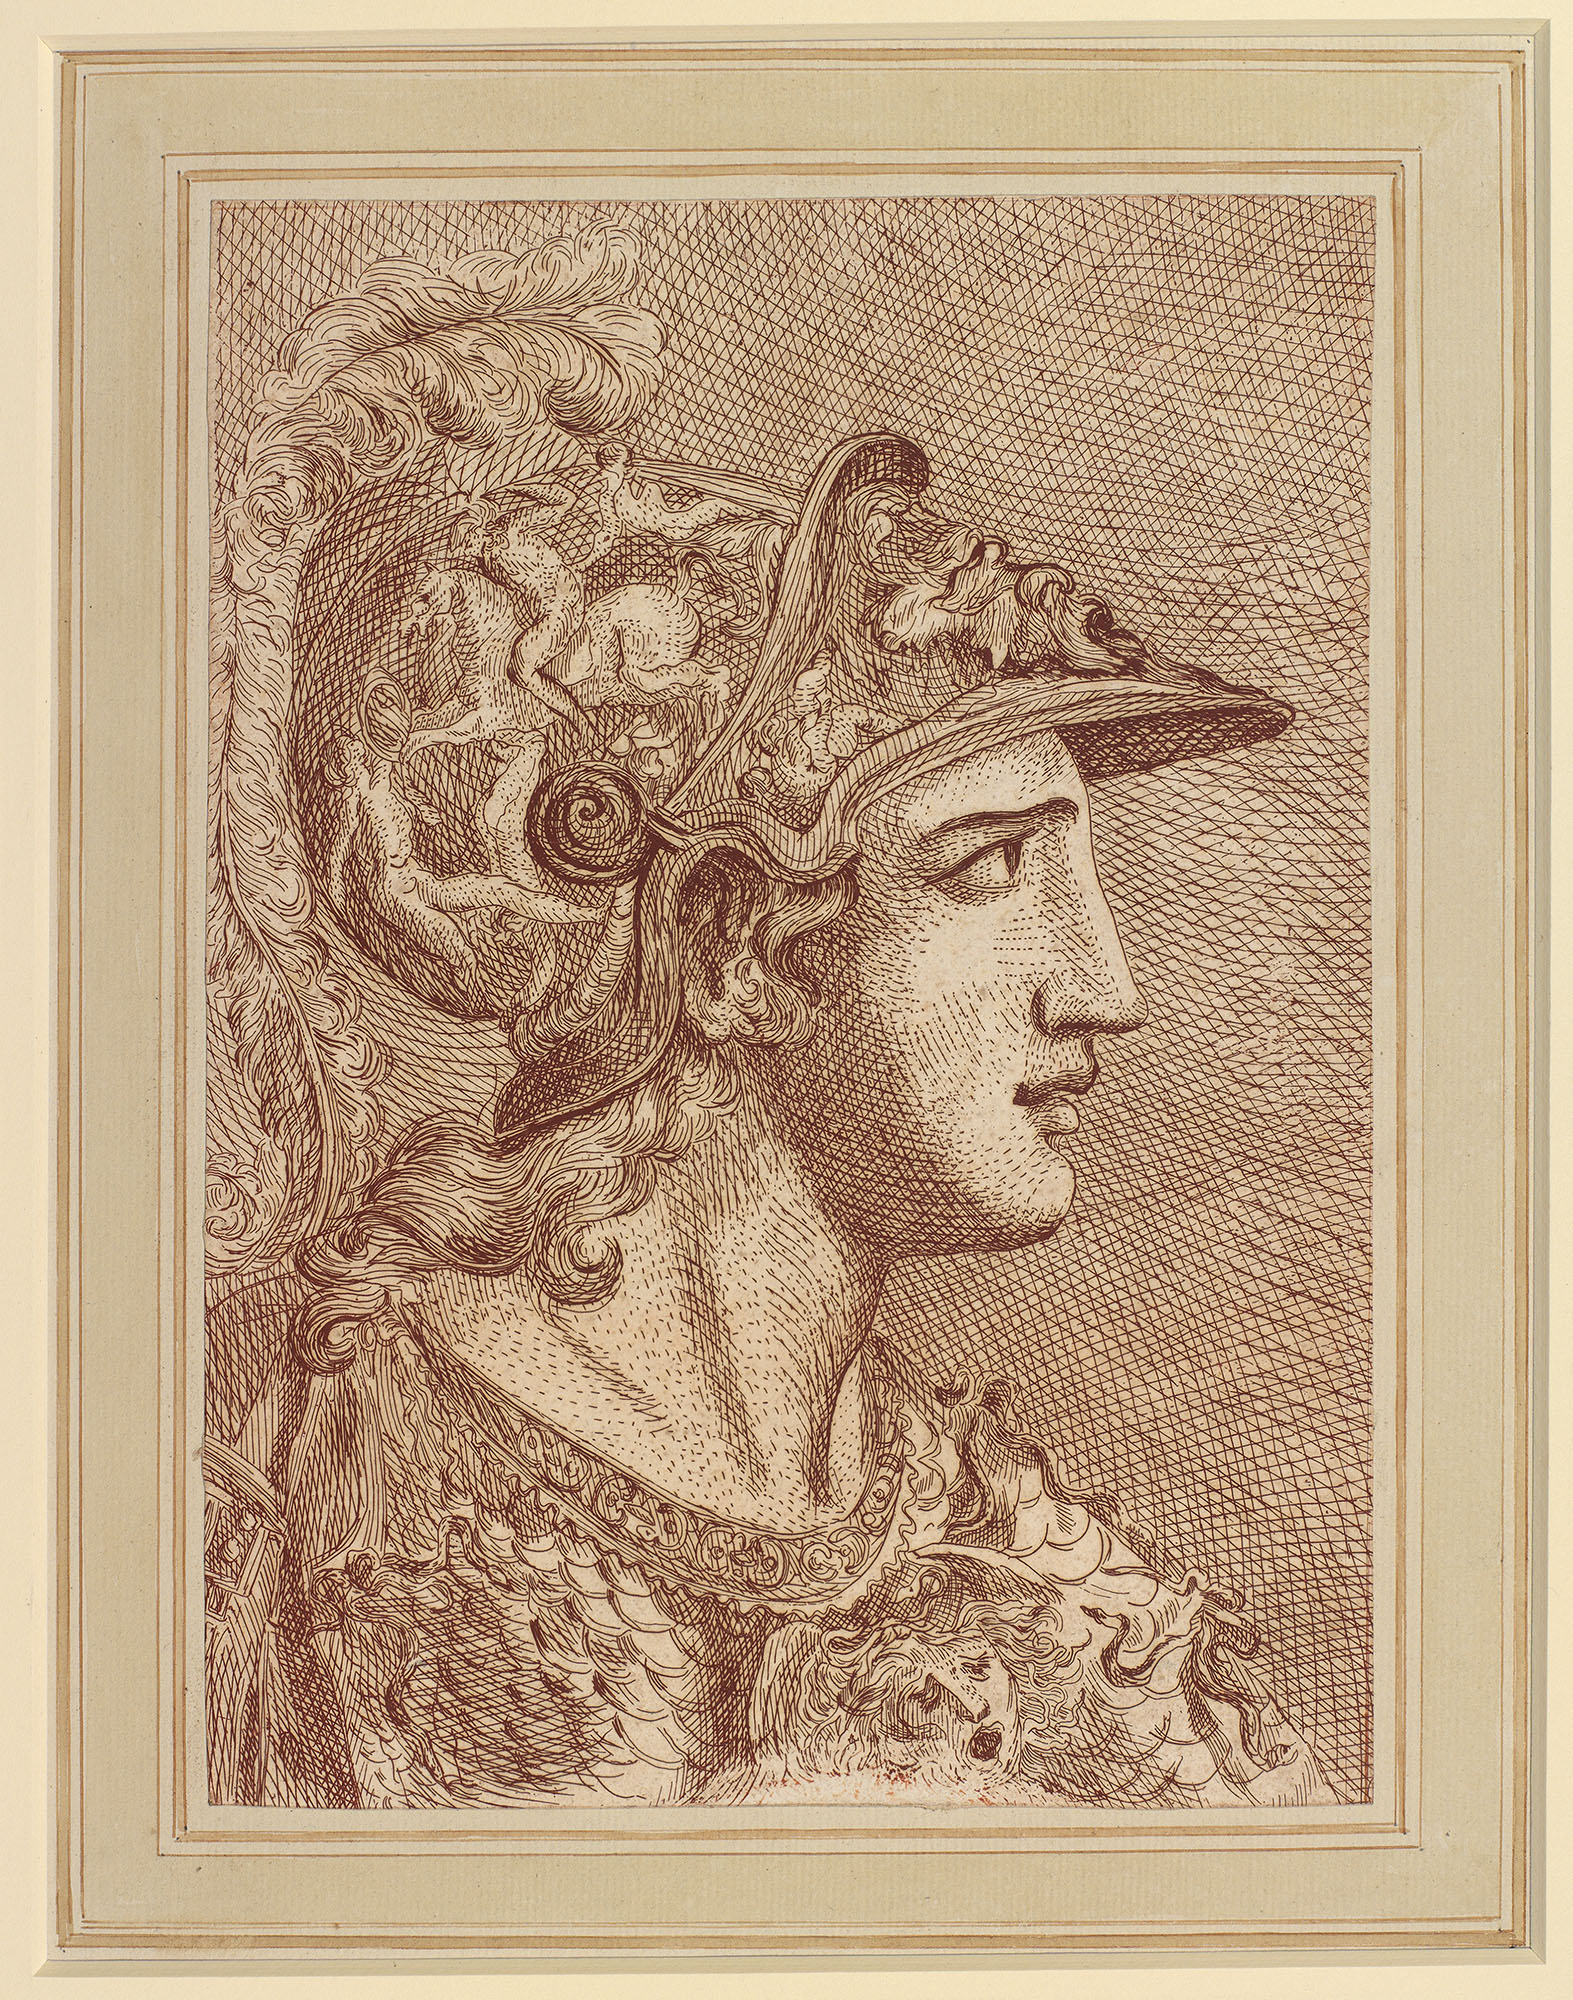 An etching showing the head of Minerva, after a drawing by Giulio Clovio (RCIN 990453). She is shown facing right in profile and is wearing a heavily decorated helmet and breastplate. With an ink and wash border.
This is a copy of a drawing in George III'